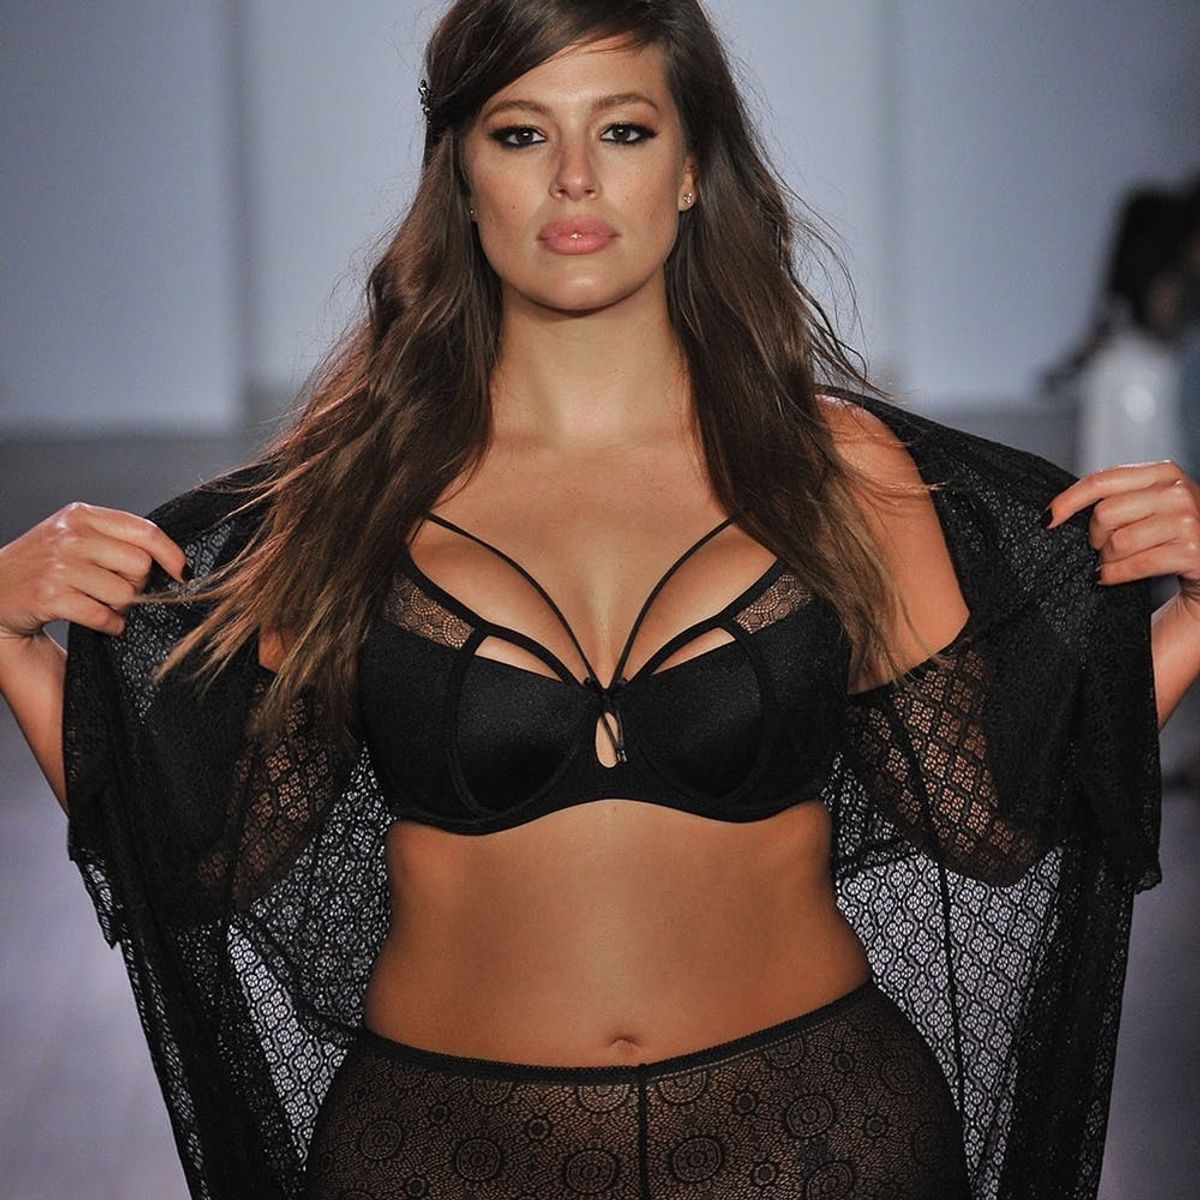 Today in Body Positivity: Ashley Graham Was Just Nominated to be a Sports Illustrated Swimsuit Rookie of the Year